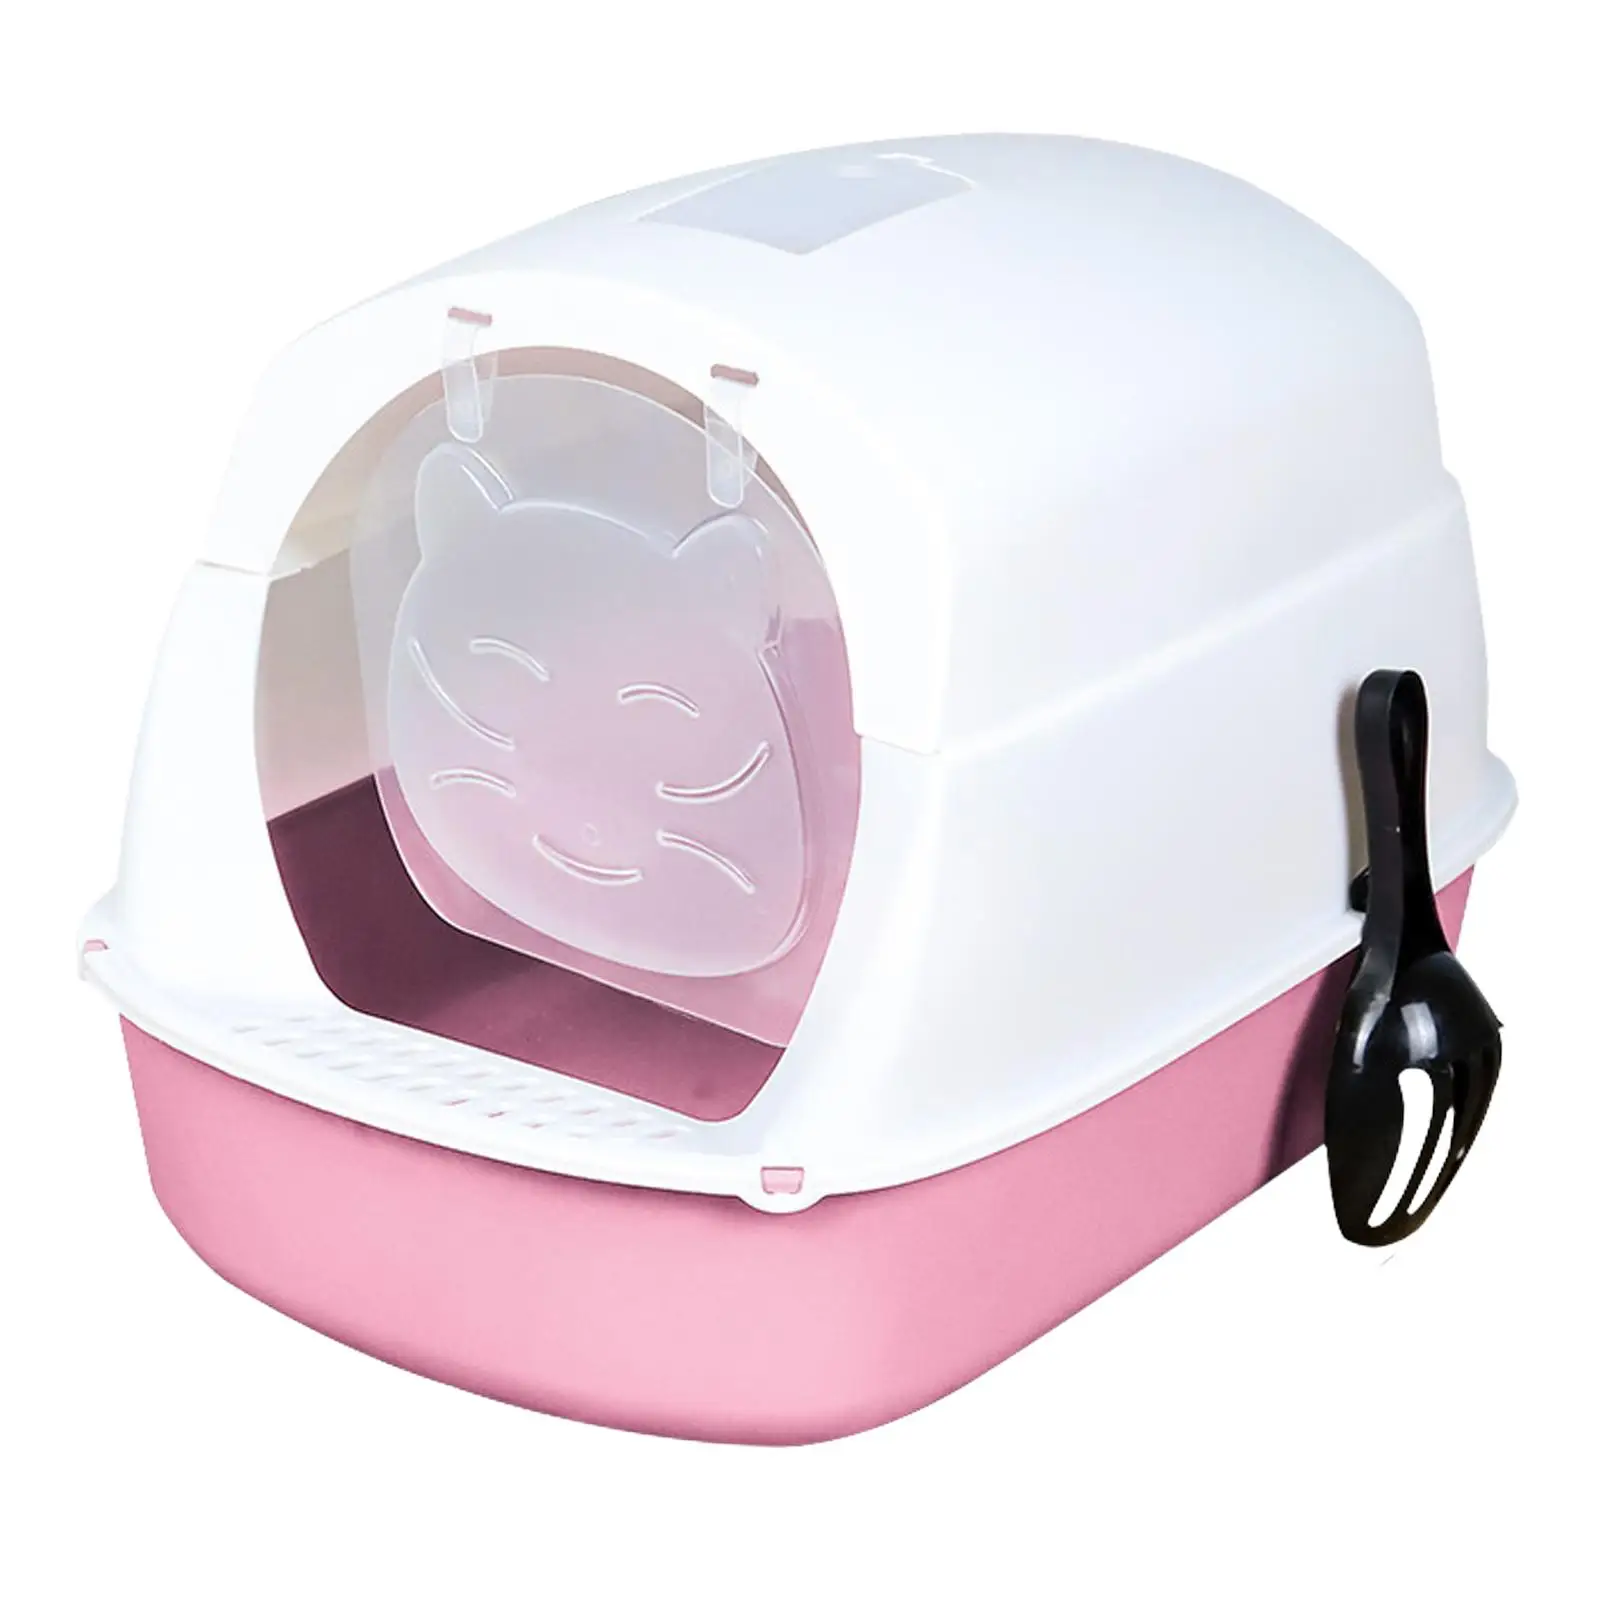 Cat Litter Box with Hood and Lid, Kitten Potty, Enclosed Cat Toilet with Flap